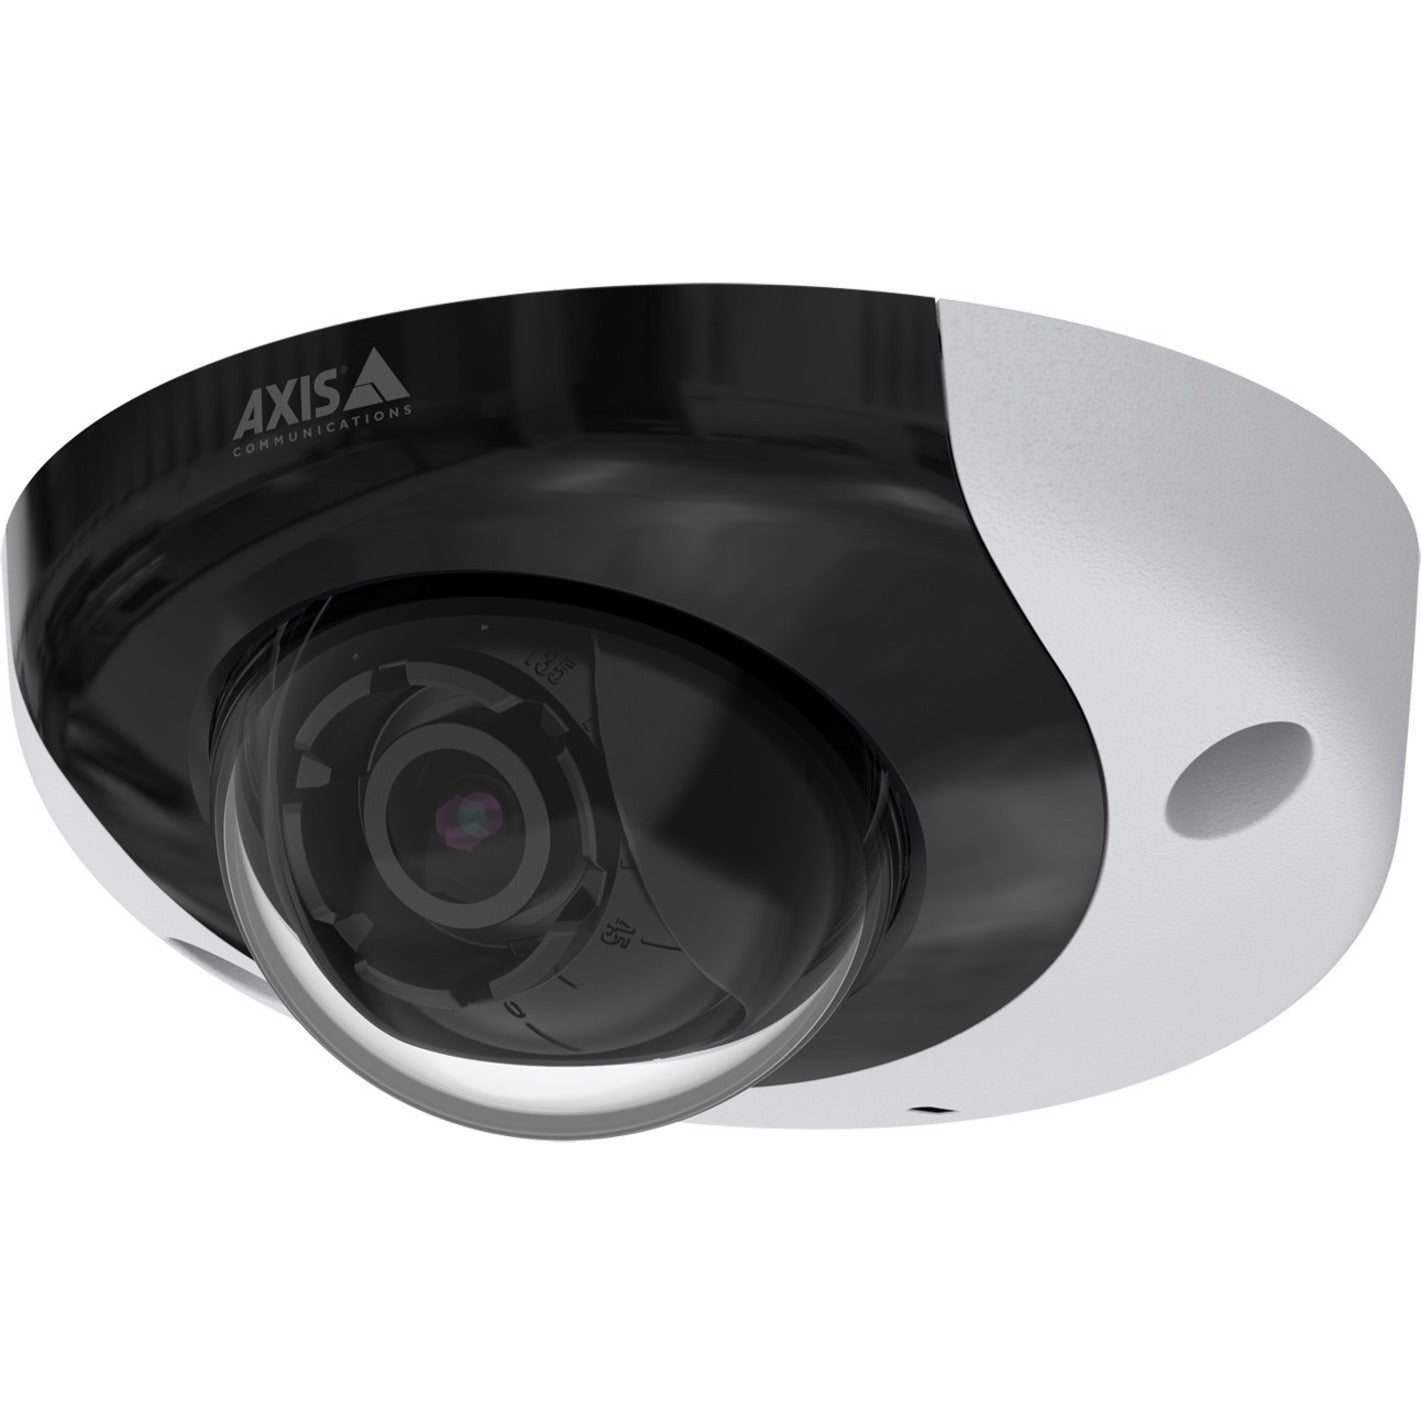 AXIS 01932-001 P3935-LR Network Camera, Full HD, Color Dome, TAA Compliant